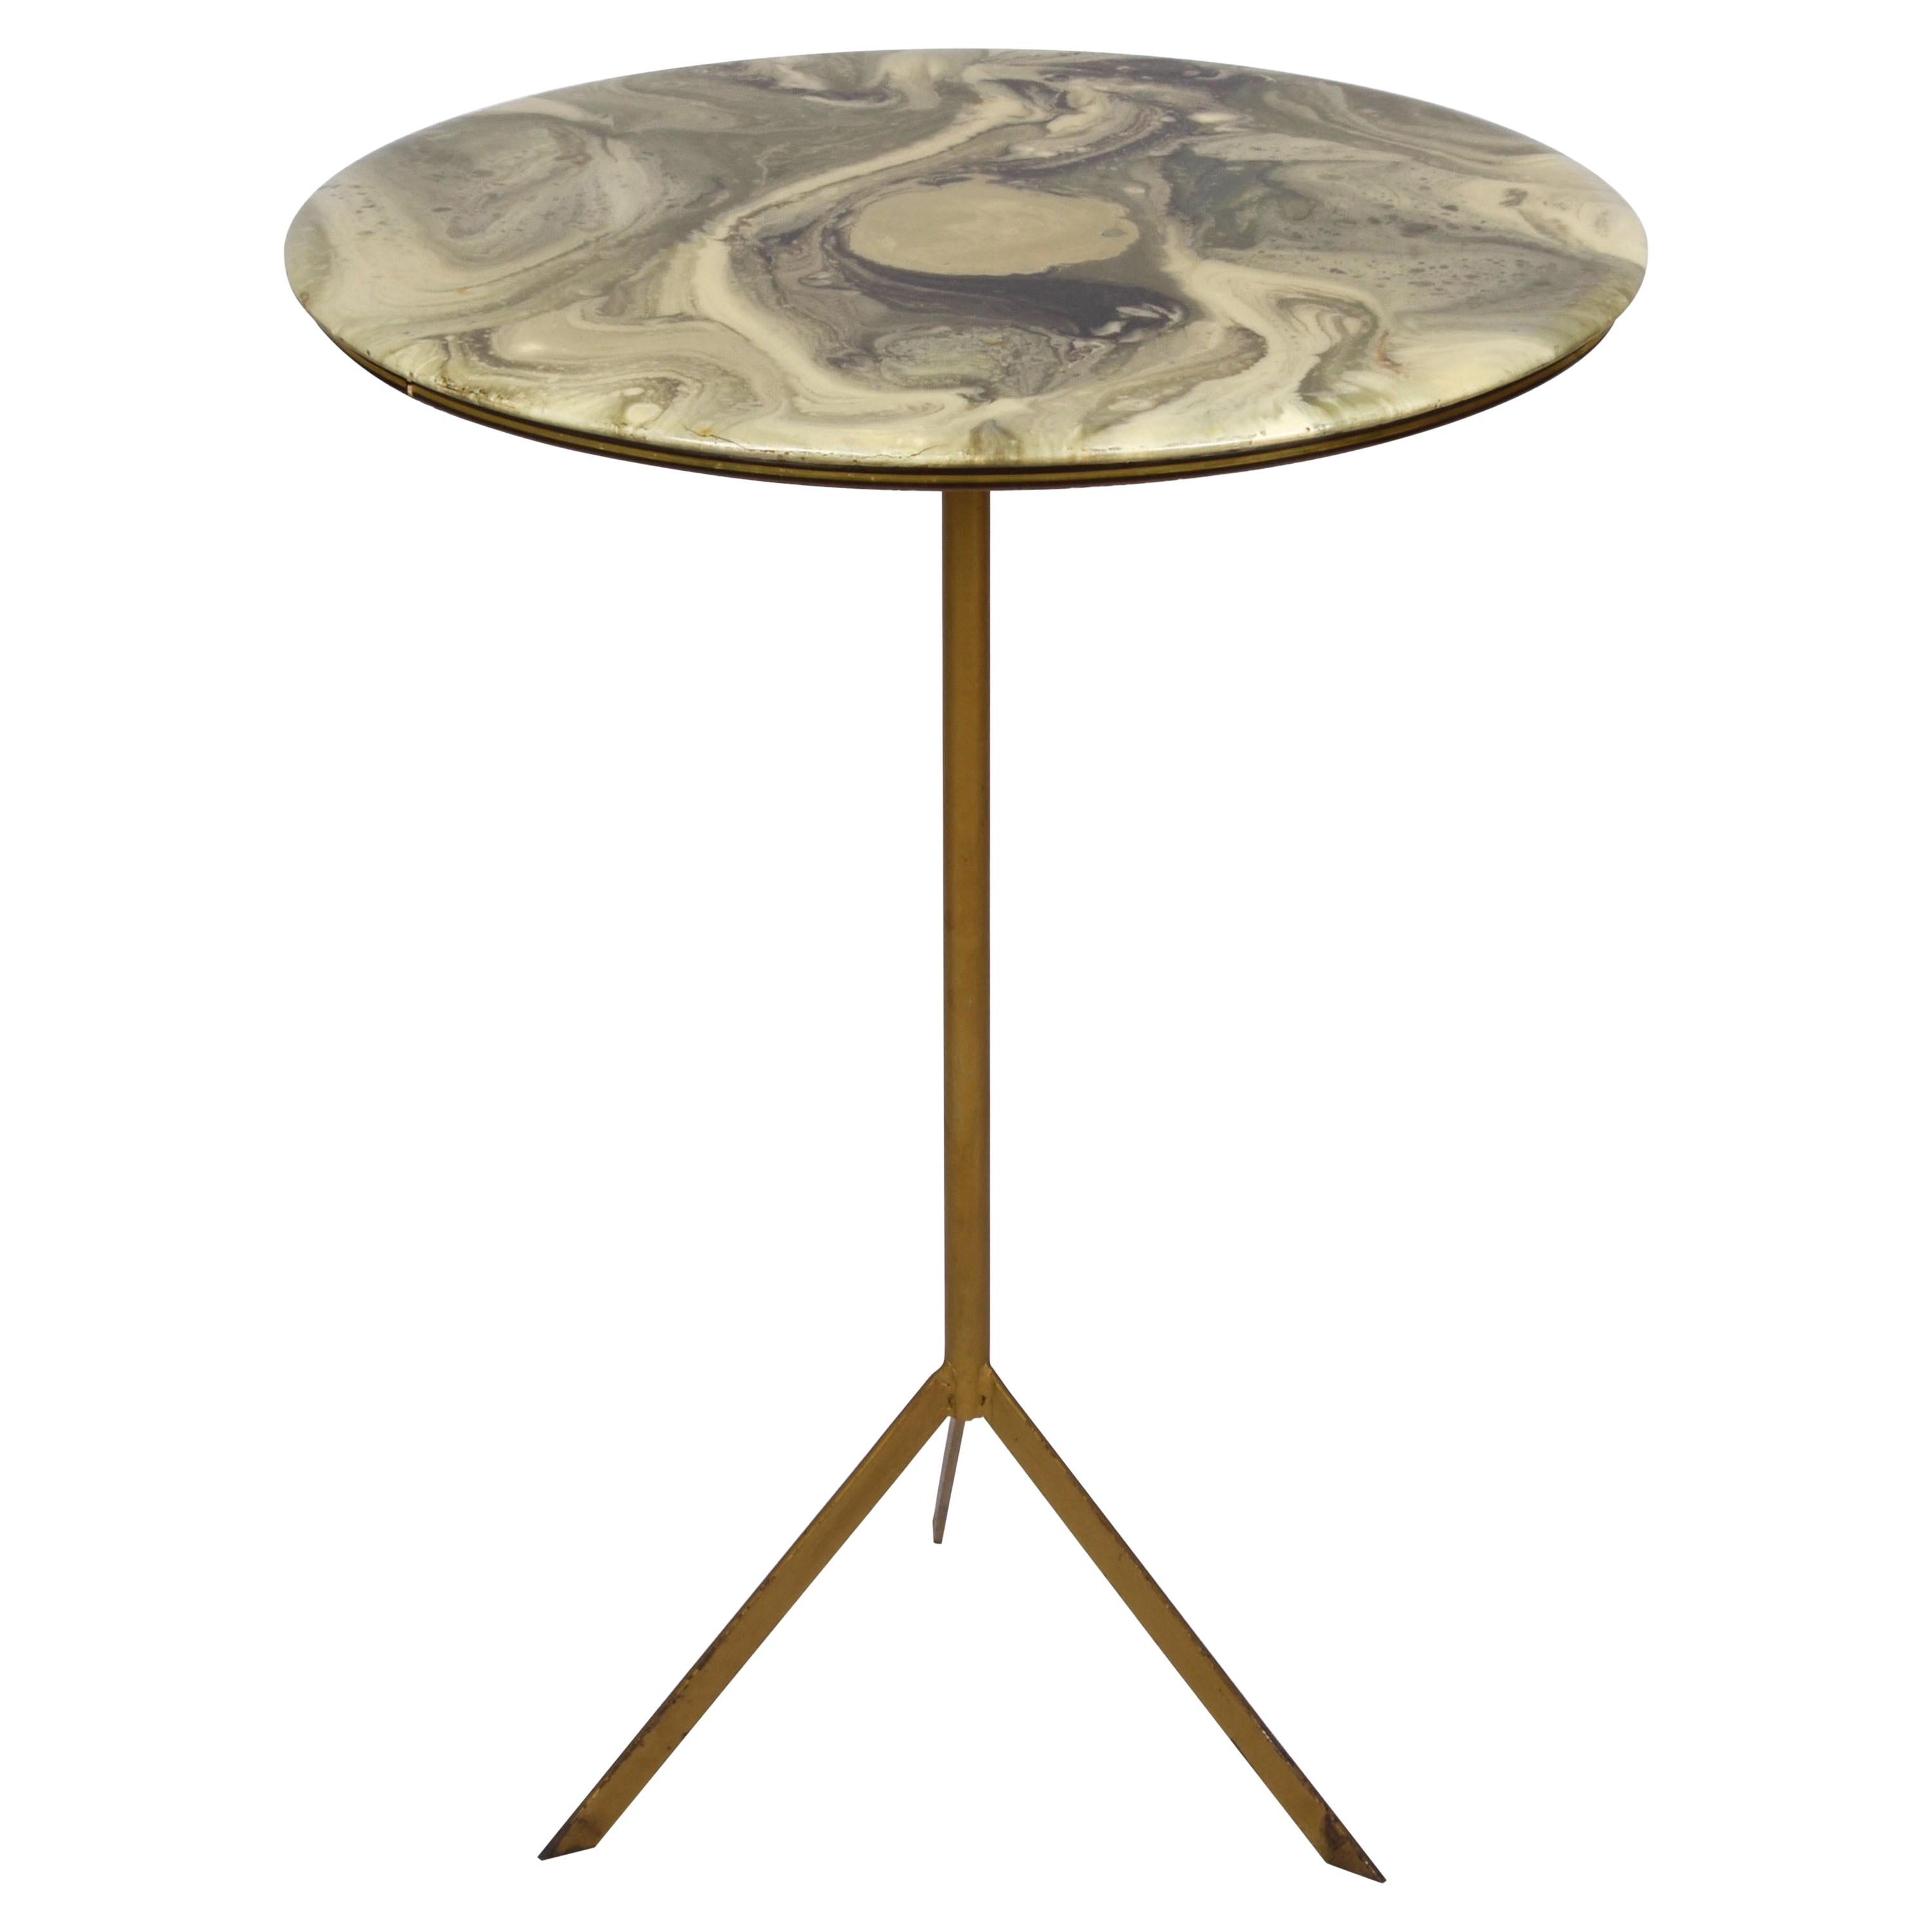 Midcentury Round Italian Gueridon Table with Marble Resin Top and Metal, 1950s